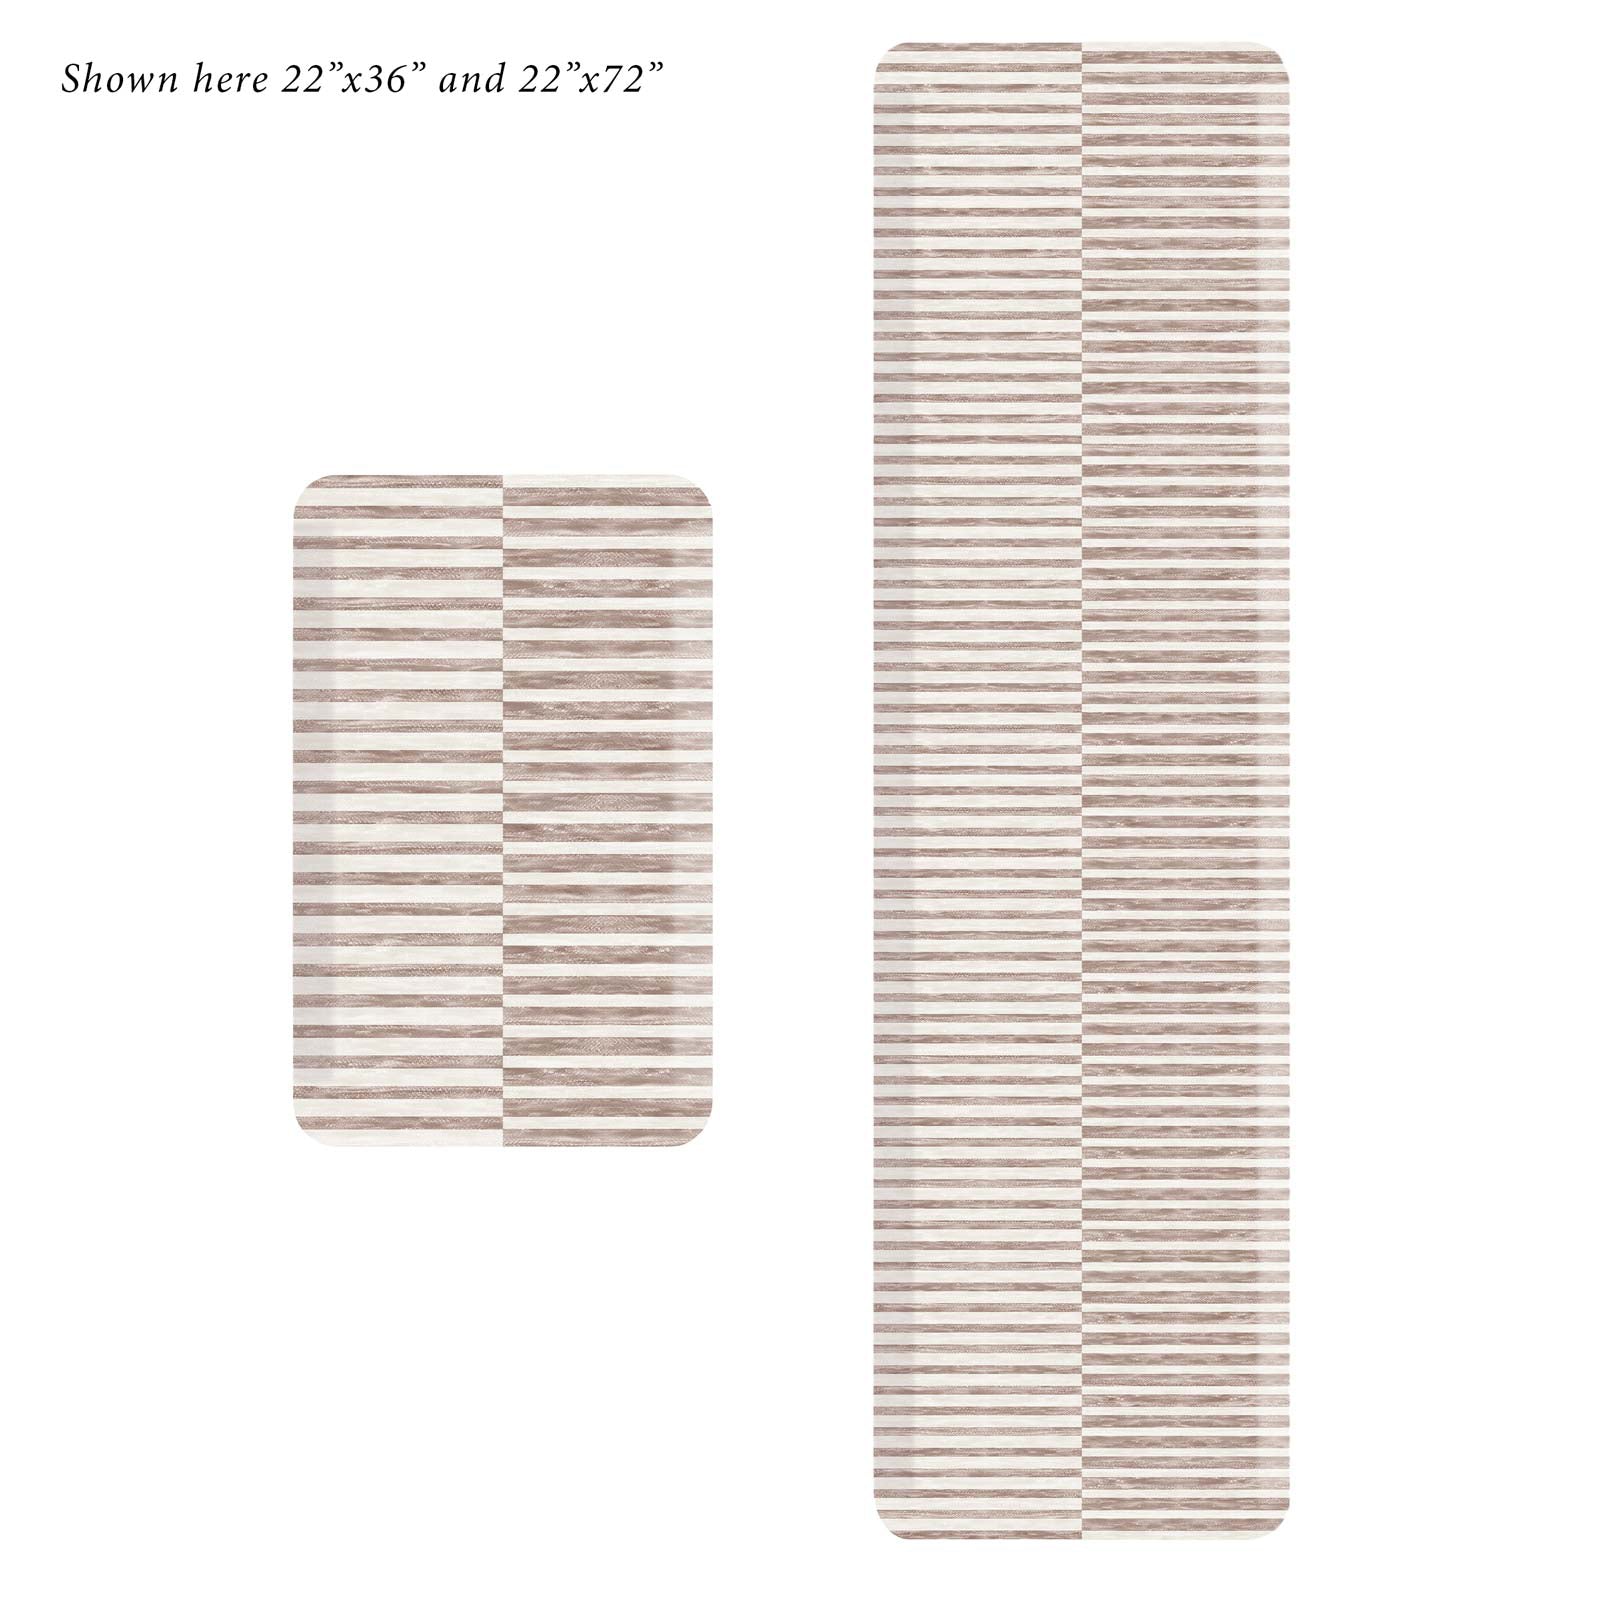 Reese chai beige and white inverted stripe standing mat shown in sizes 22x36 and 22x72